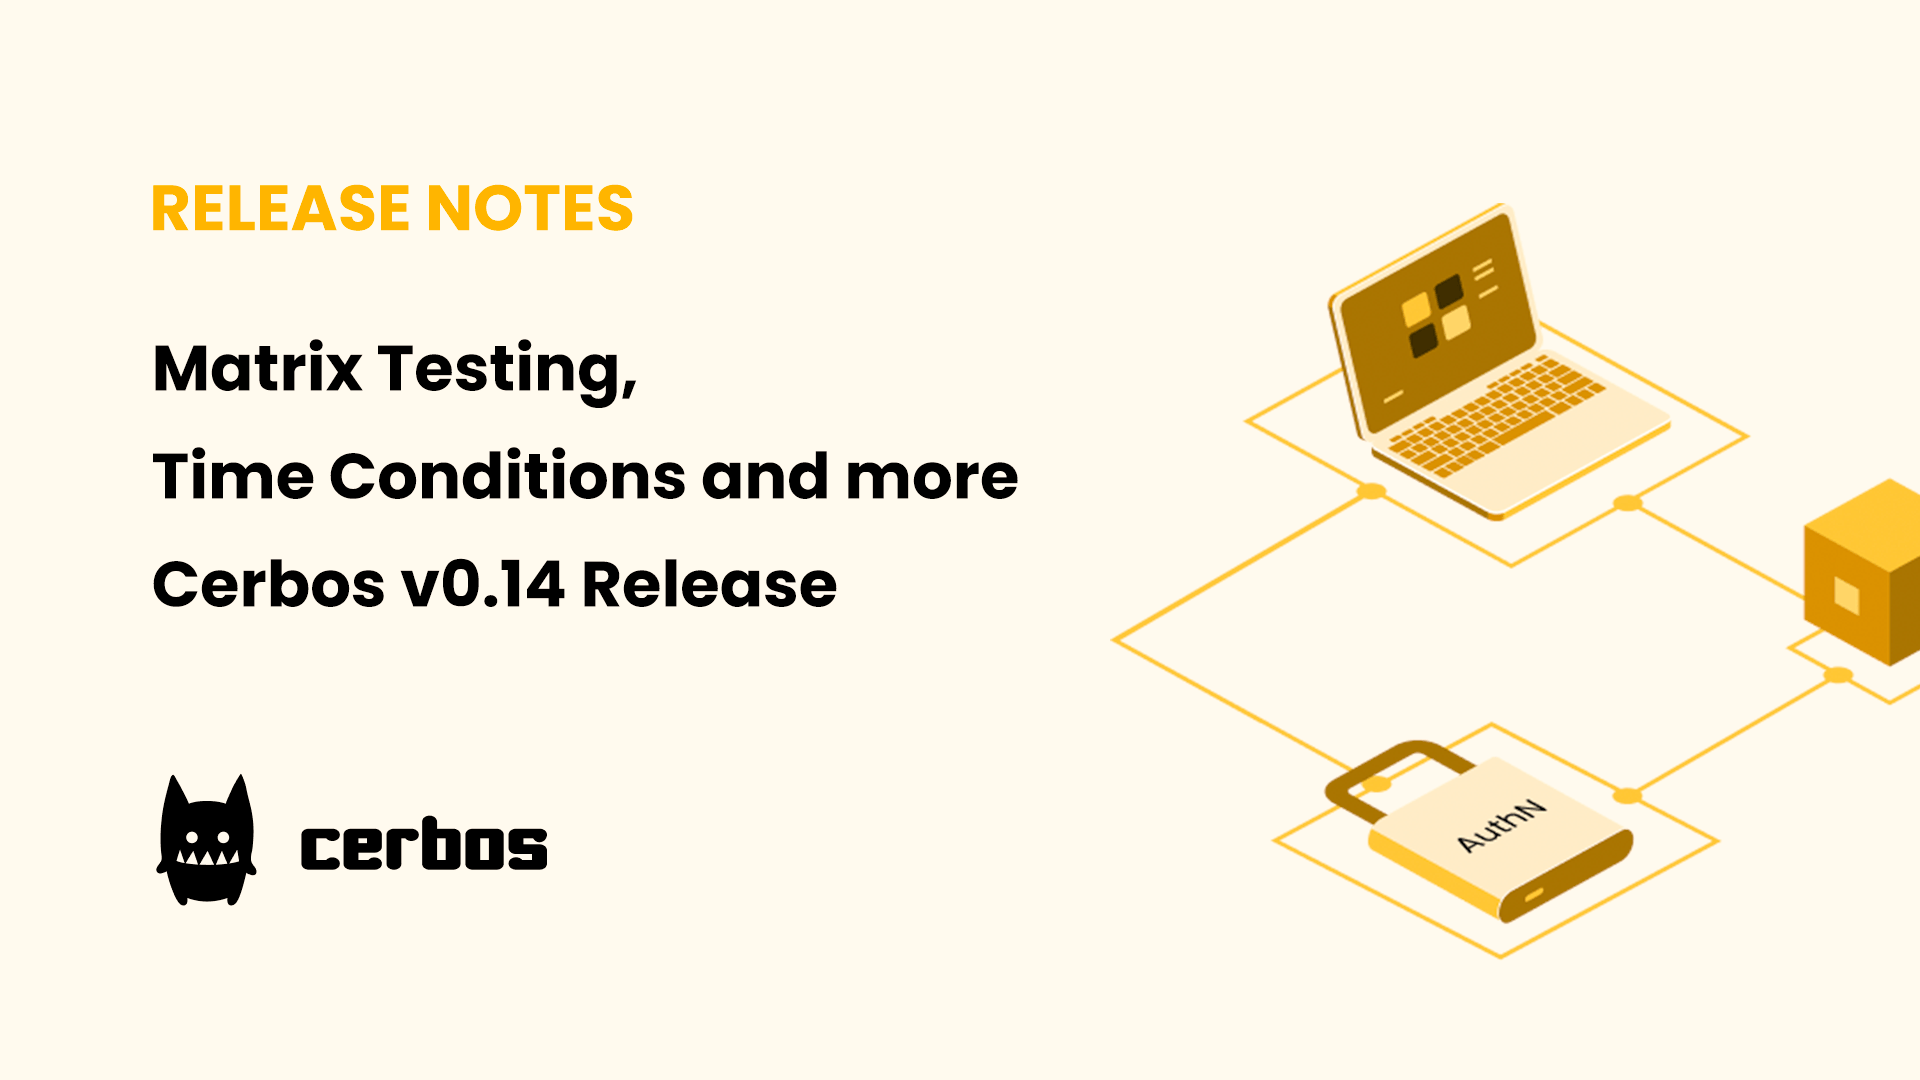 Matrix Testing, Time Conditions and more - Cerbos v0.14 Release